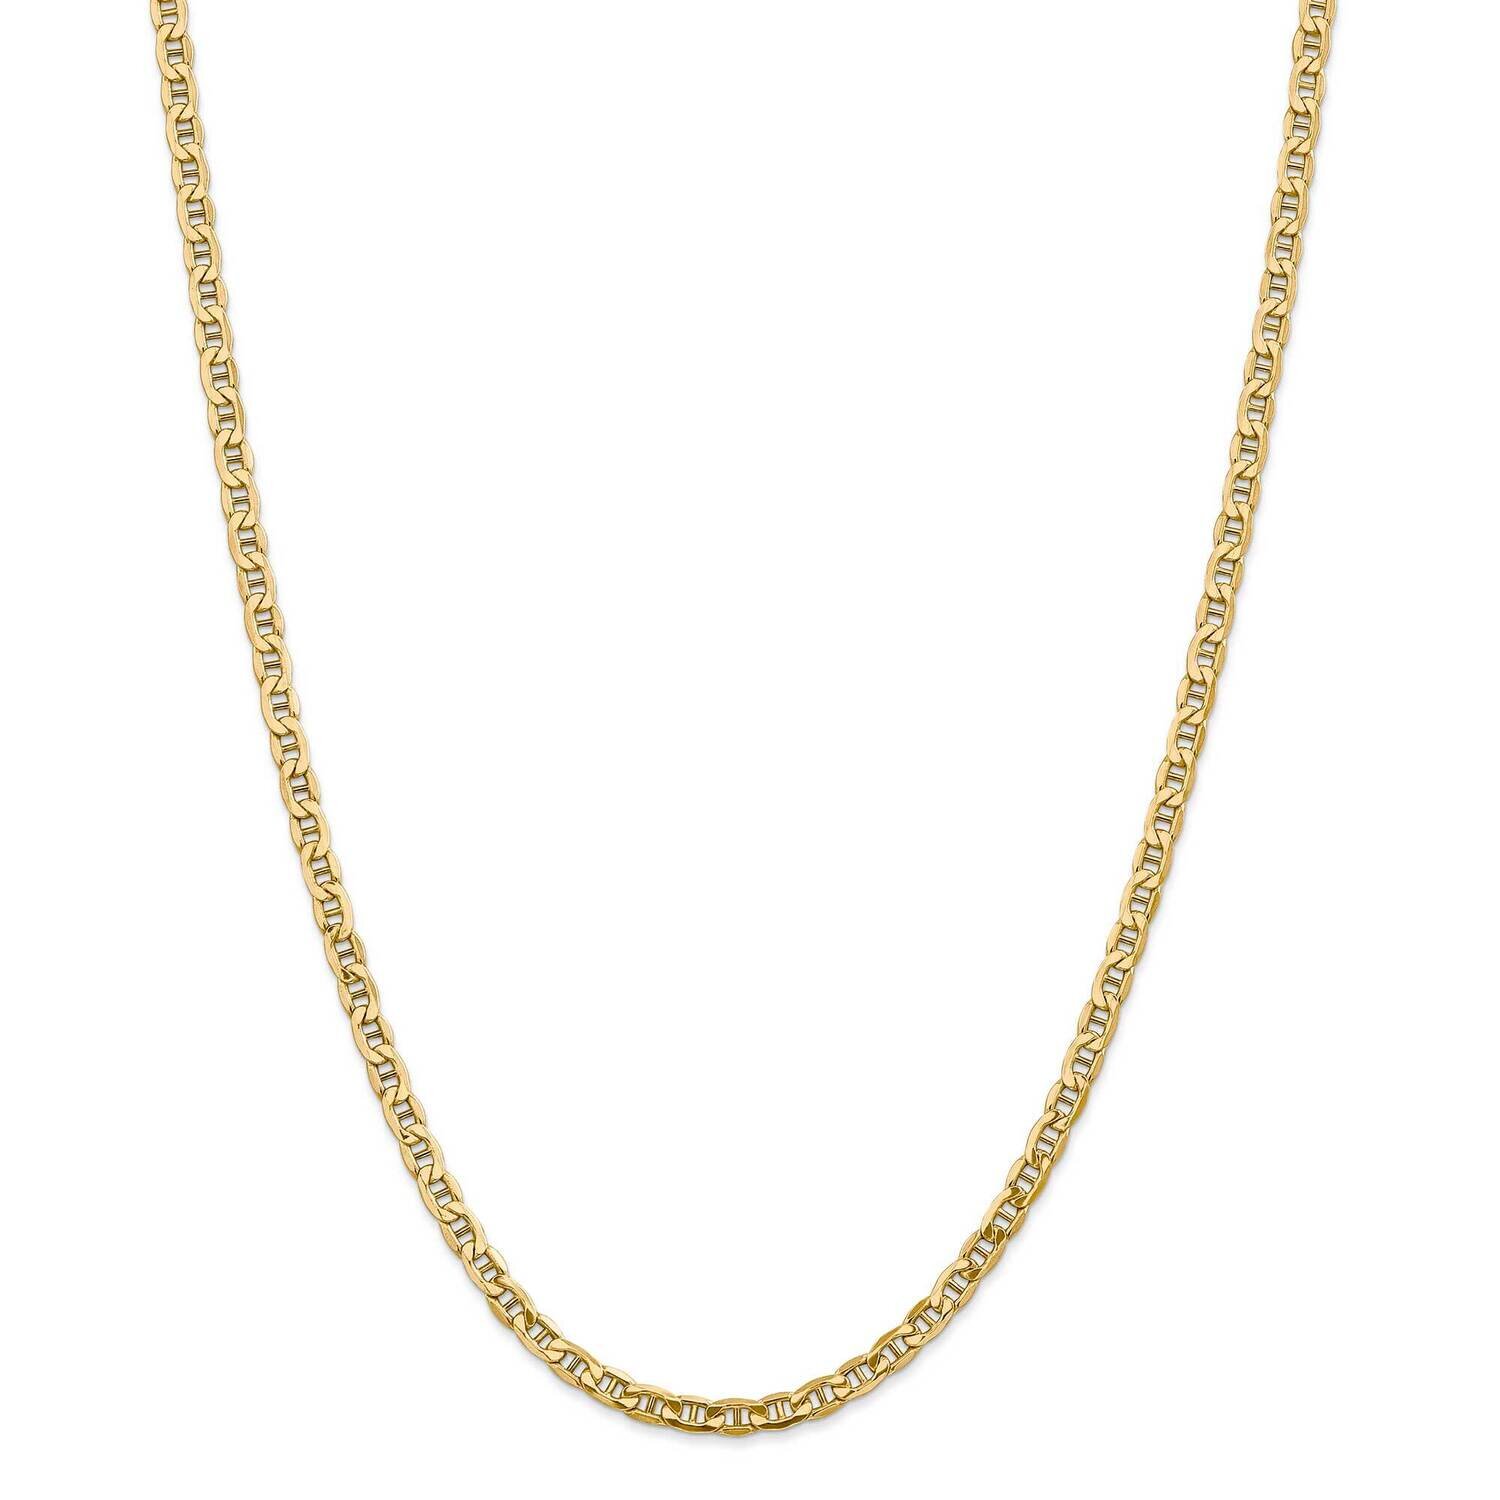 4mm Semi-Solid Anchor Chain 22 Inch 14k Gold BC100-22